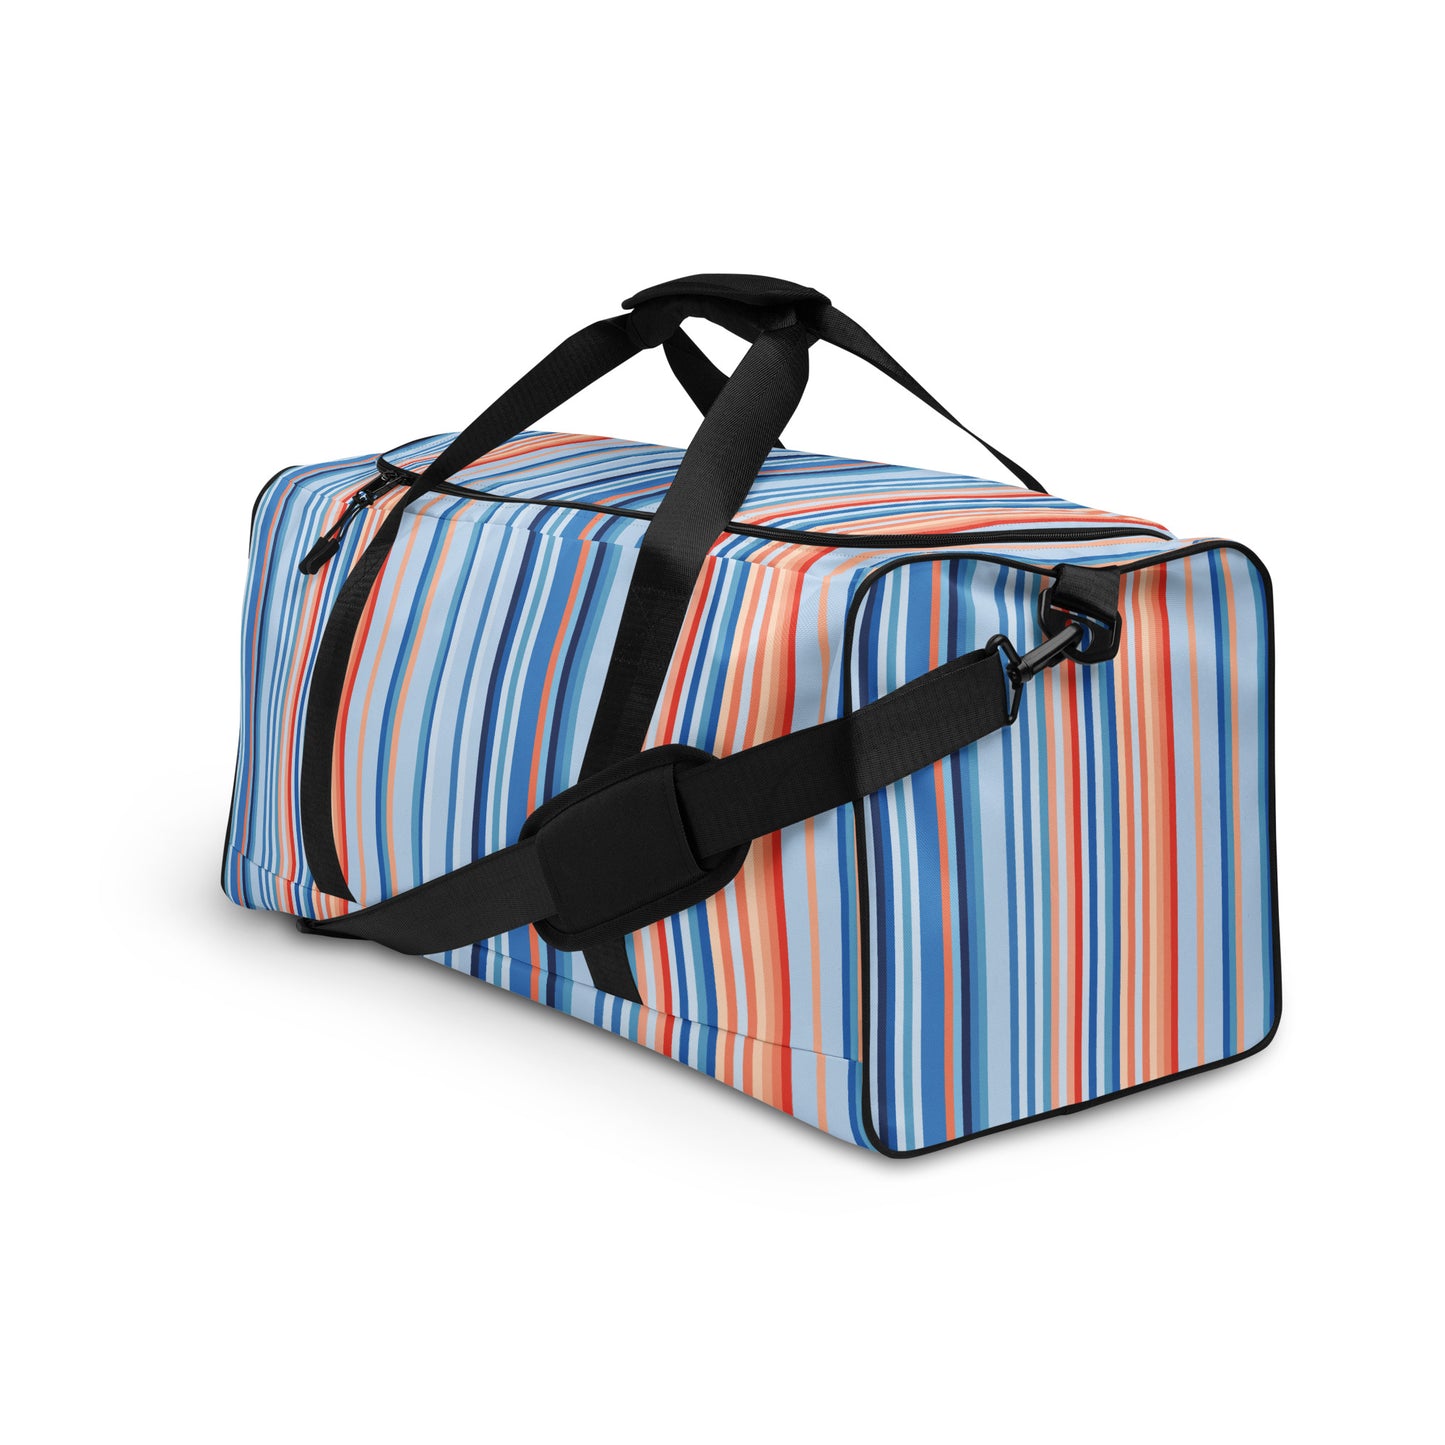 Climate Change Global Warming Stripes - Sustainably Made Duffle bag Vertical